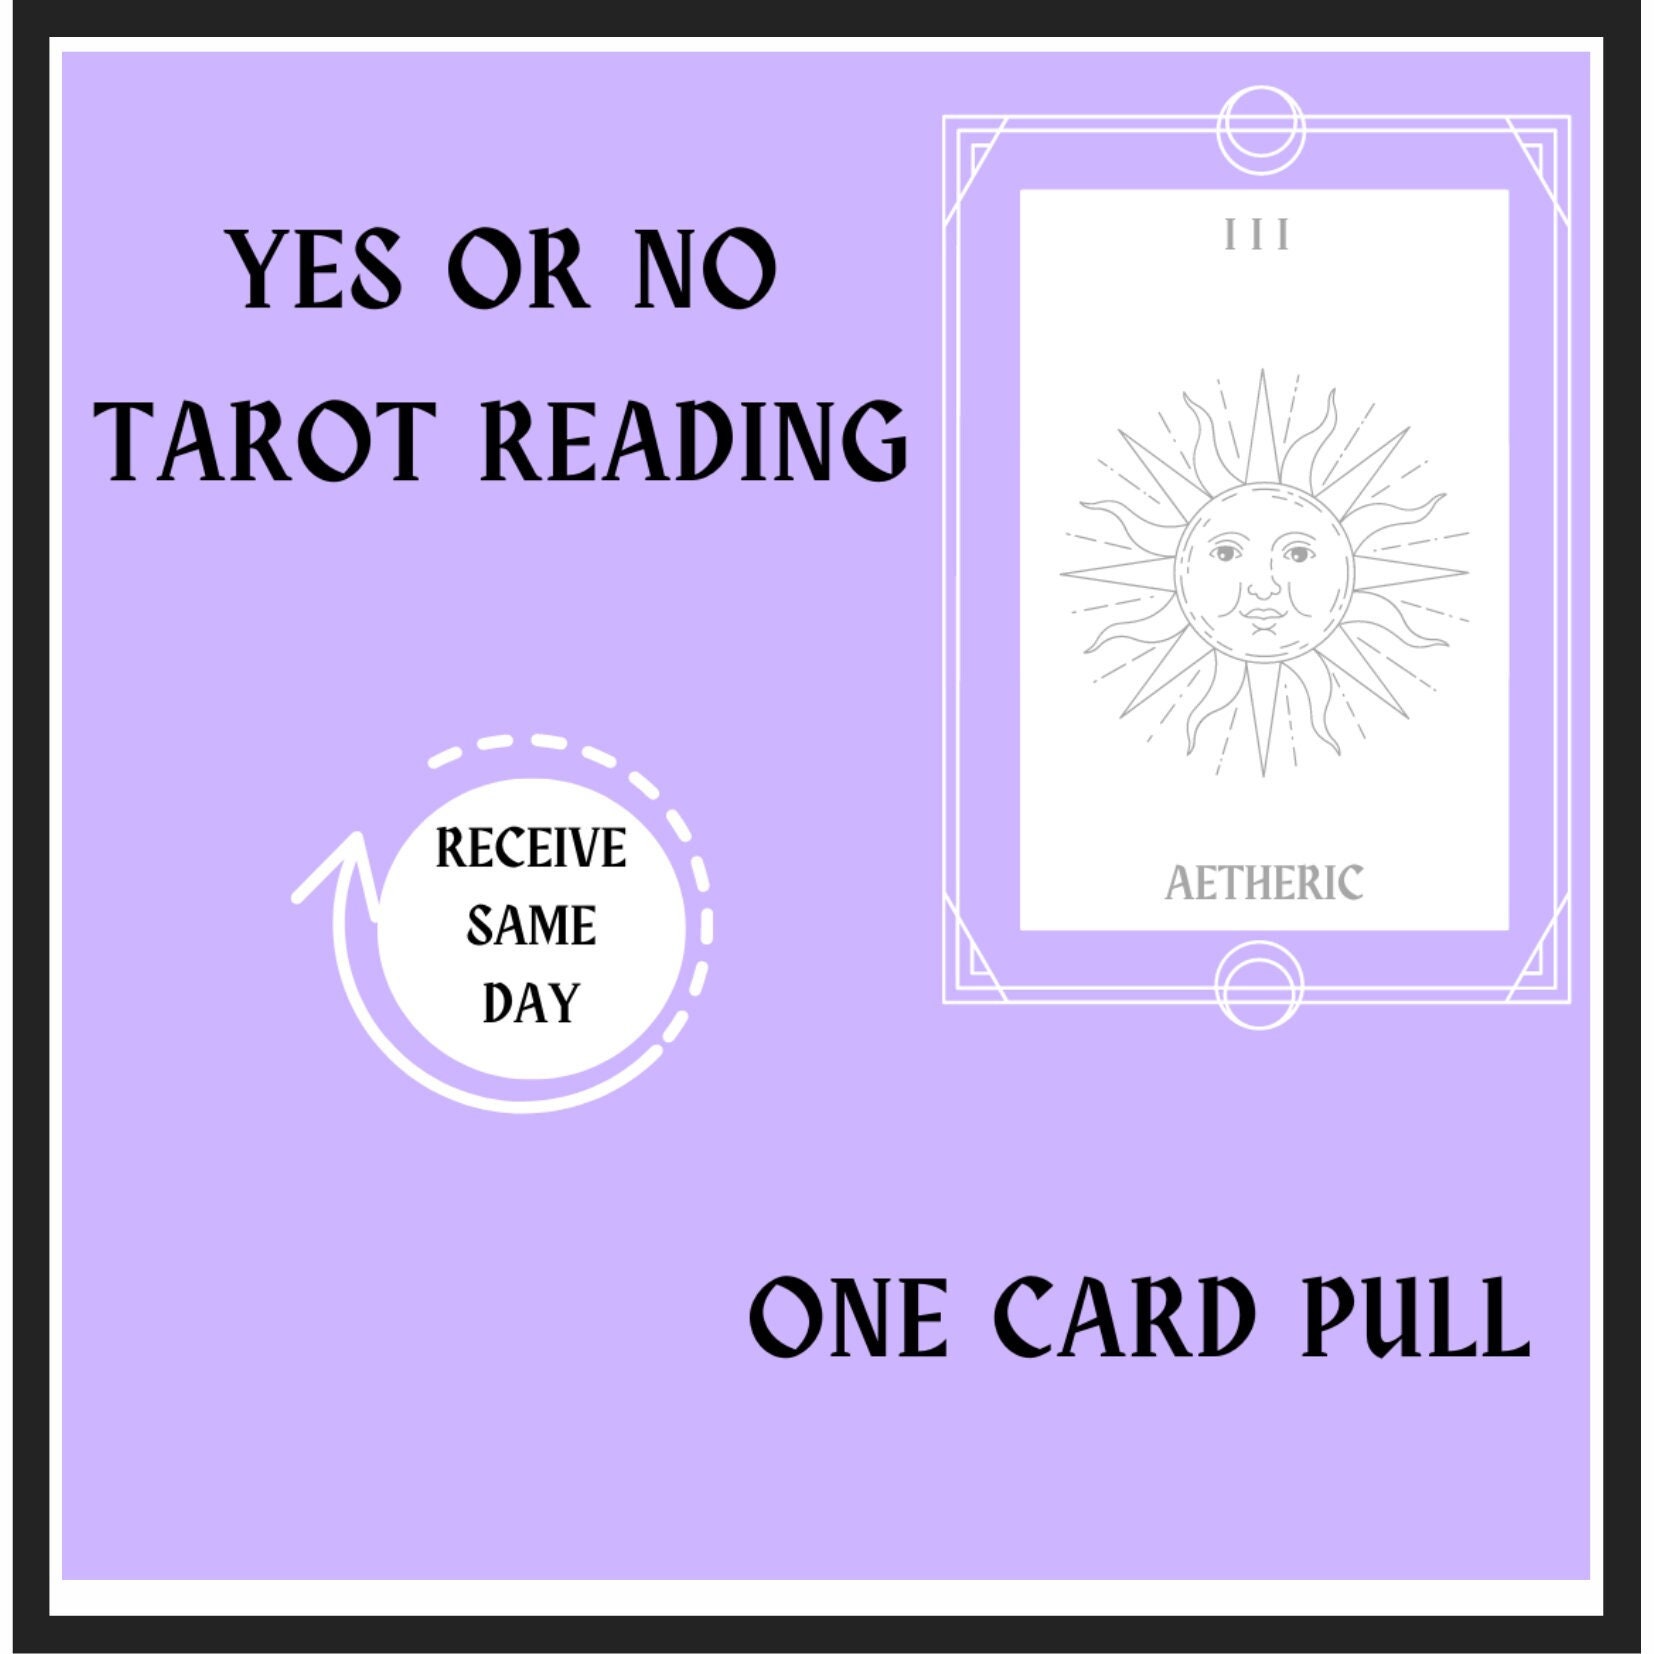 Yes or No Tarot Reading Guidance on Your Decision - Etsy